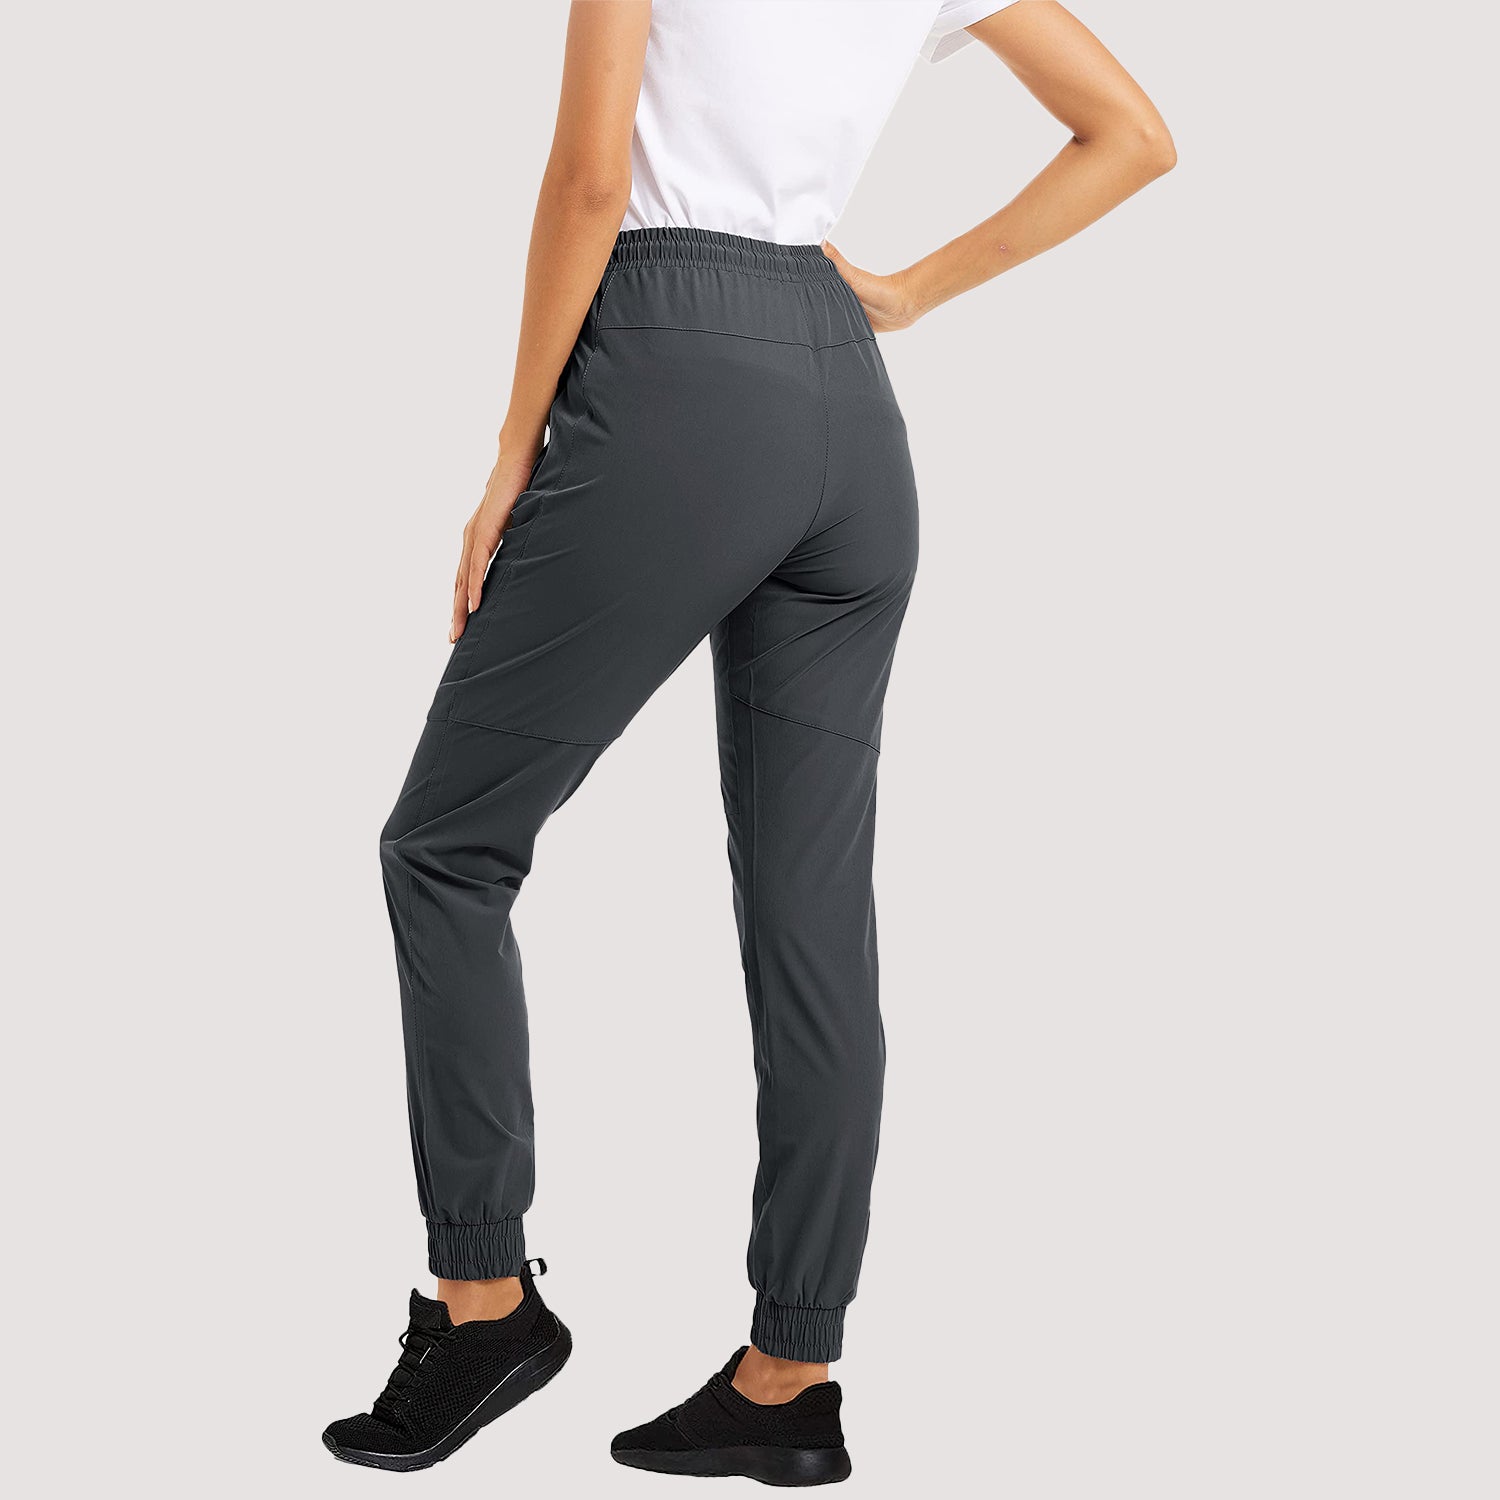 Women's Quick Dry Joggers Running Pants with 2 Zipper Pockets Sweatpan –  MAGCOMSEN